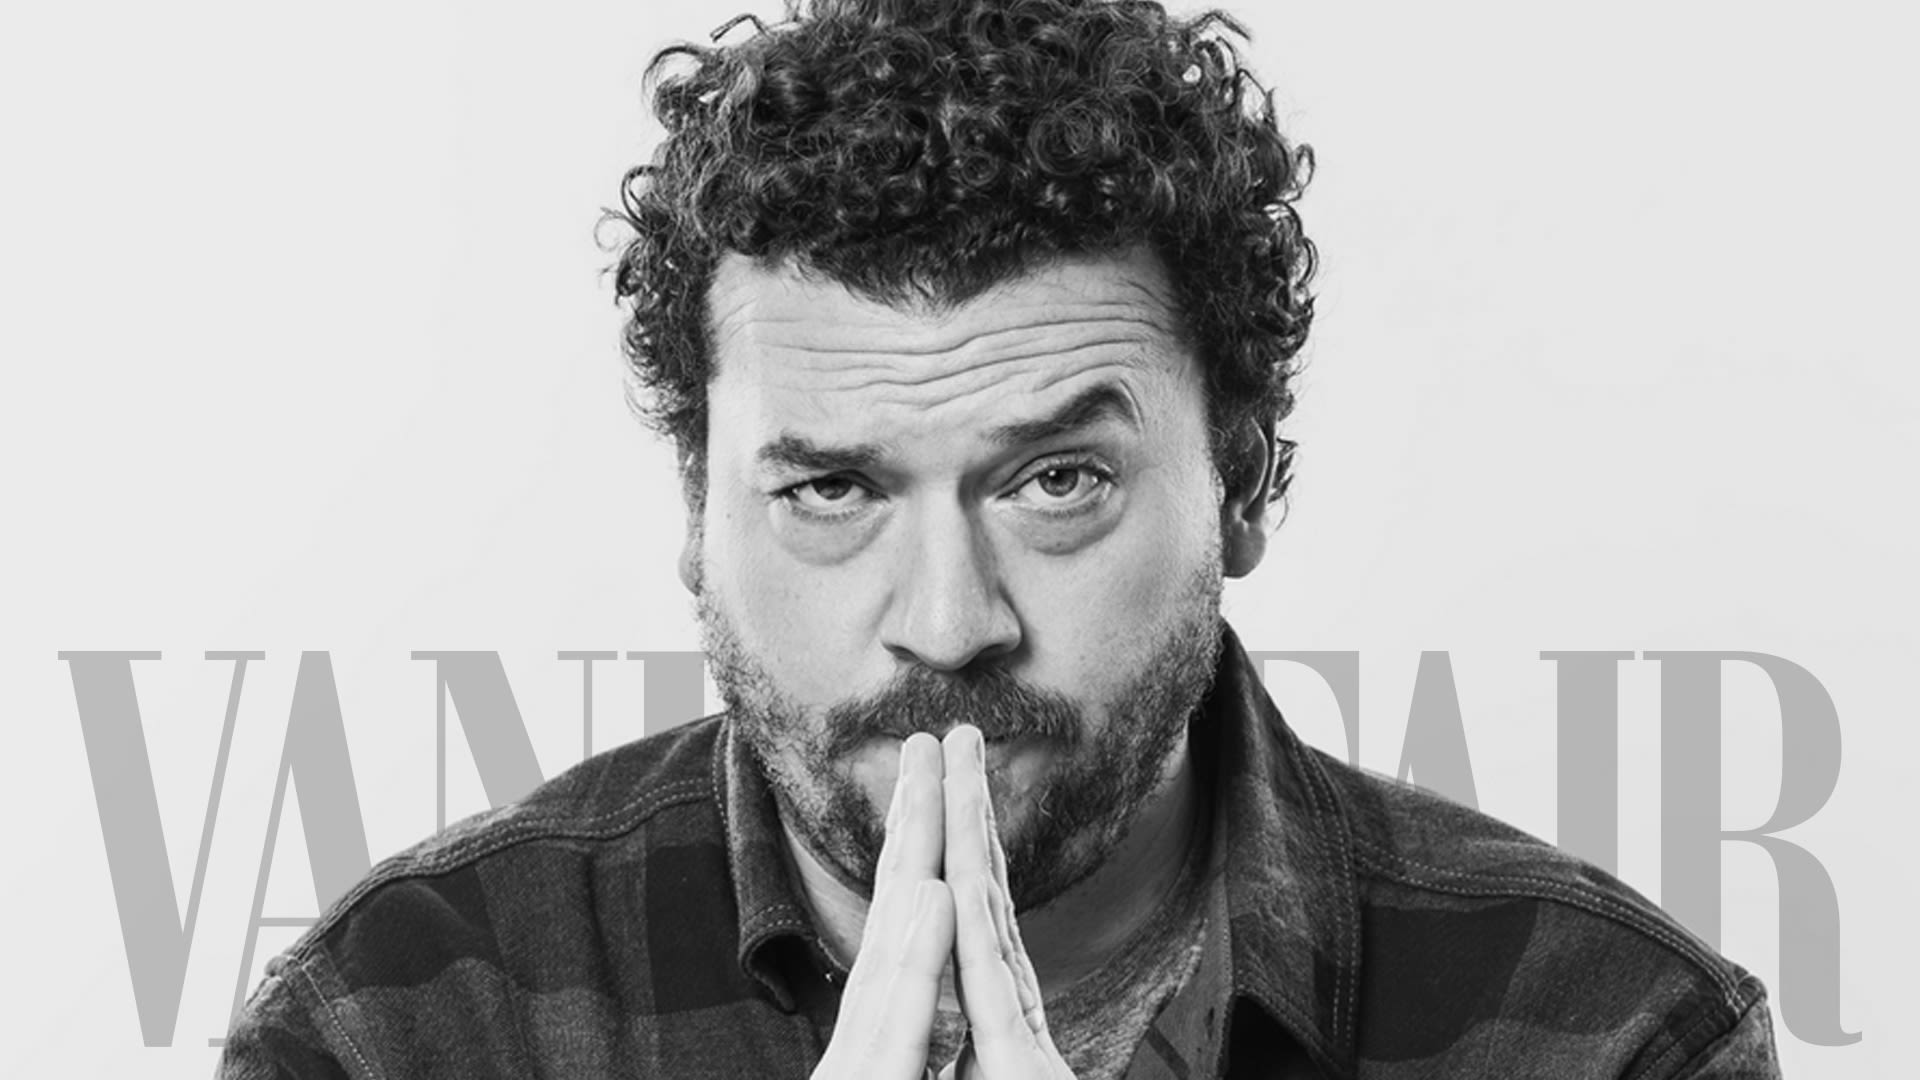 Danny D Sliping Porn Hd - Watch Danny McBride Took a Prop Home from Don Verdean and Worried His Wife  | Sundance Film Festival | Vanity Fair